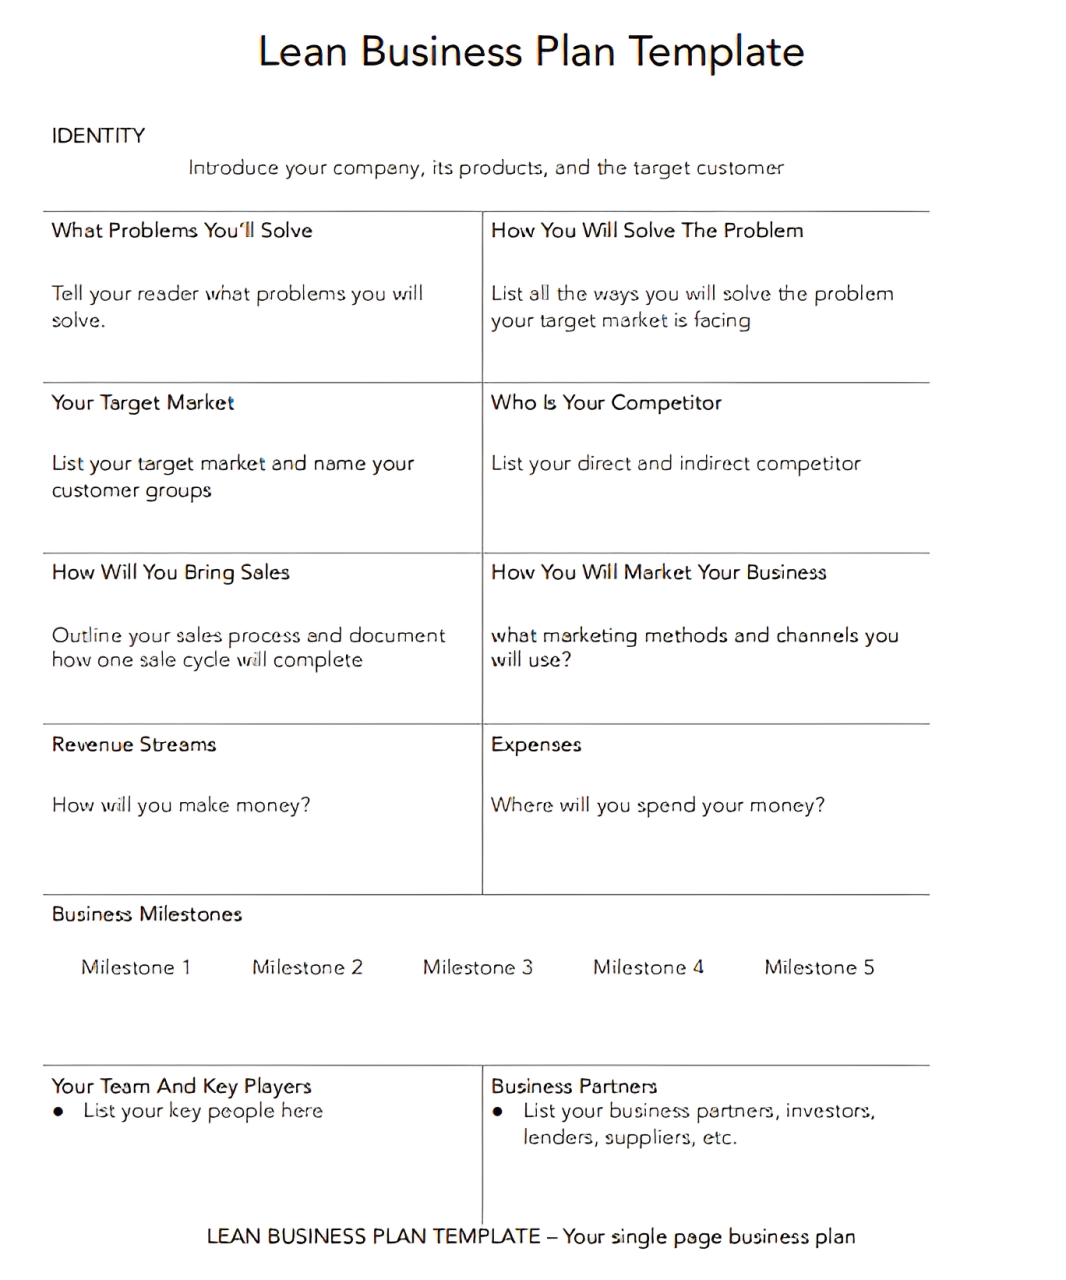 The Lean Business Plan Template